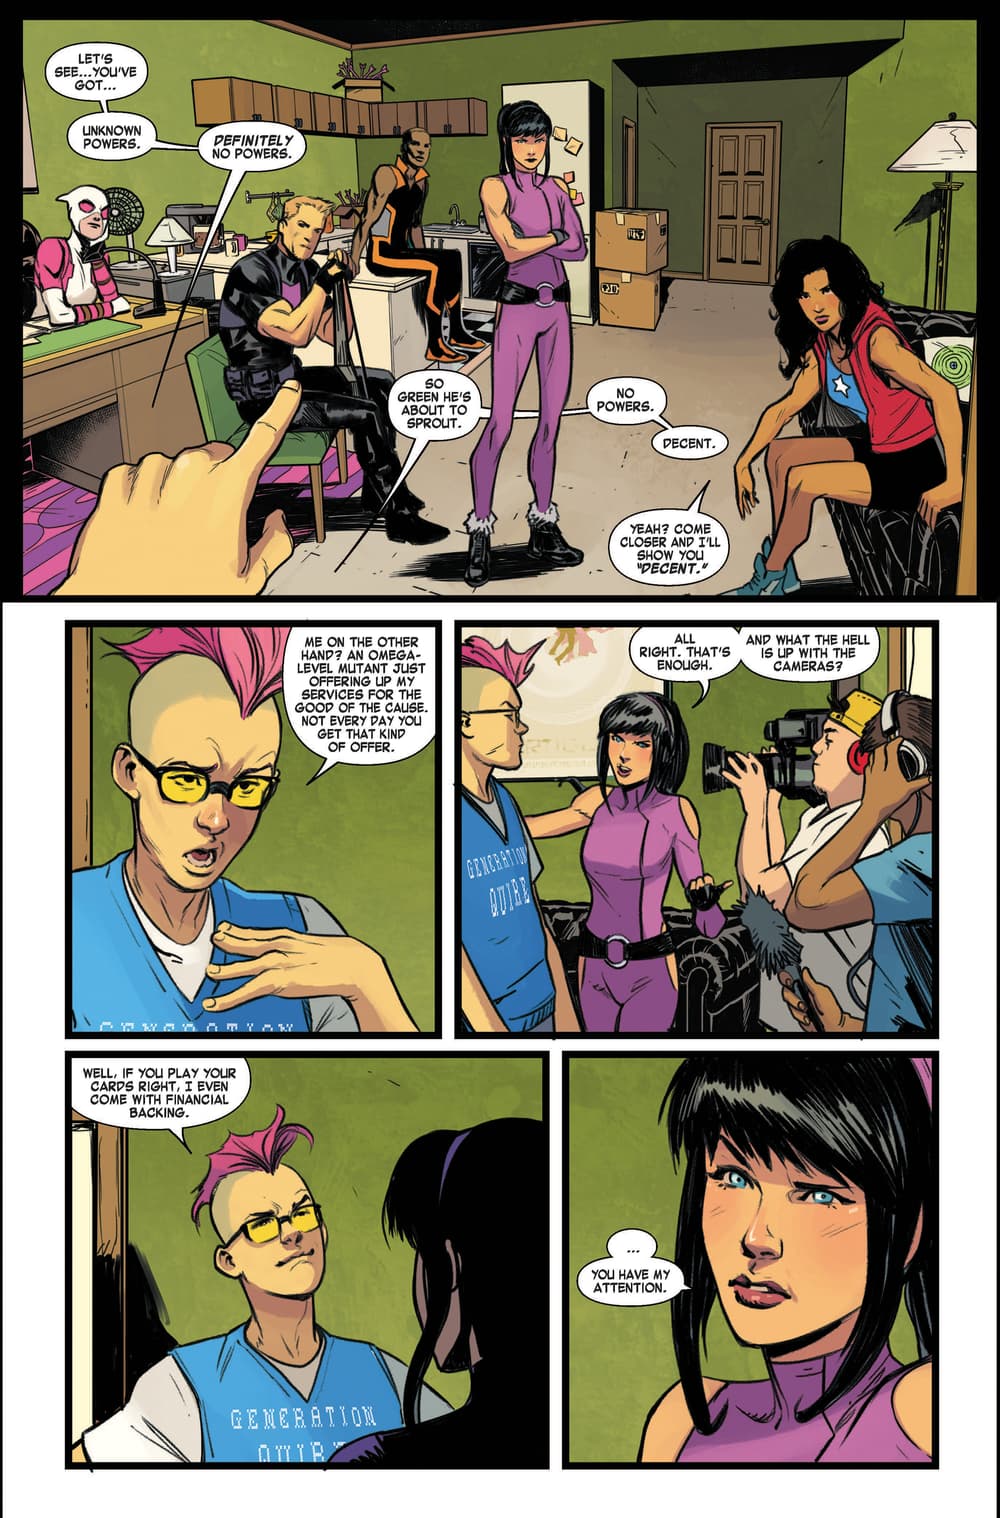 West Coast Avengers 1 preview page